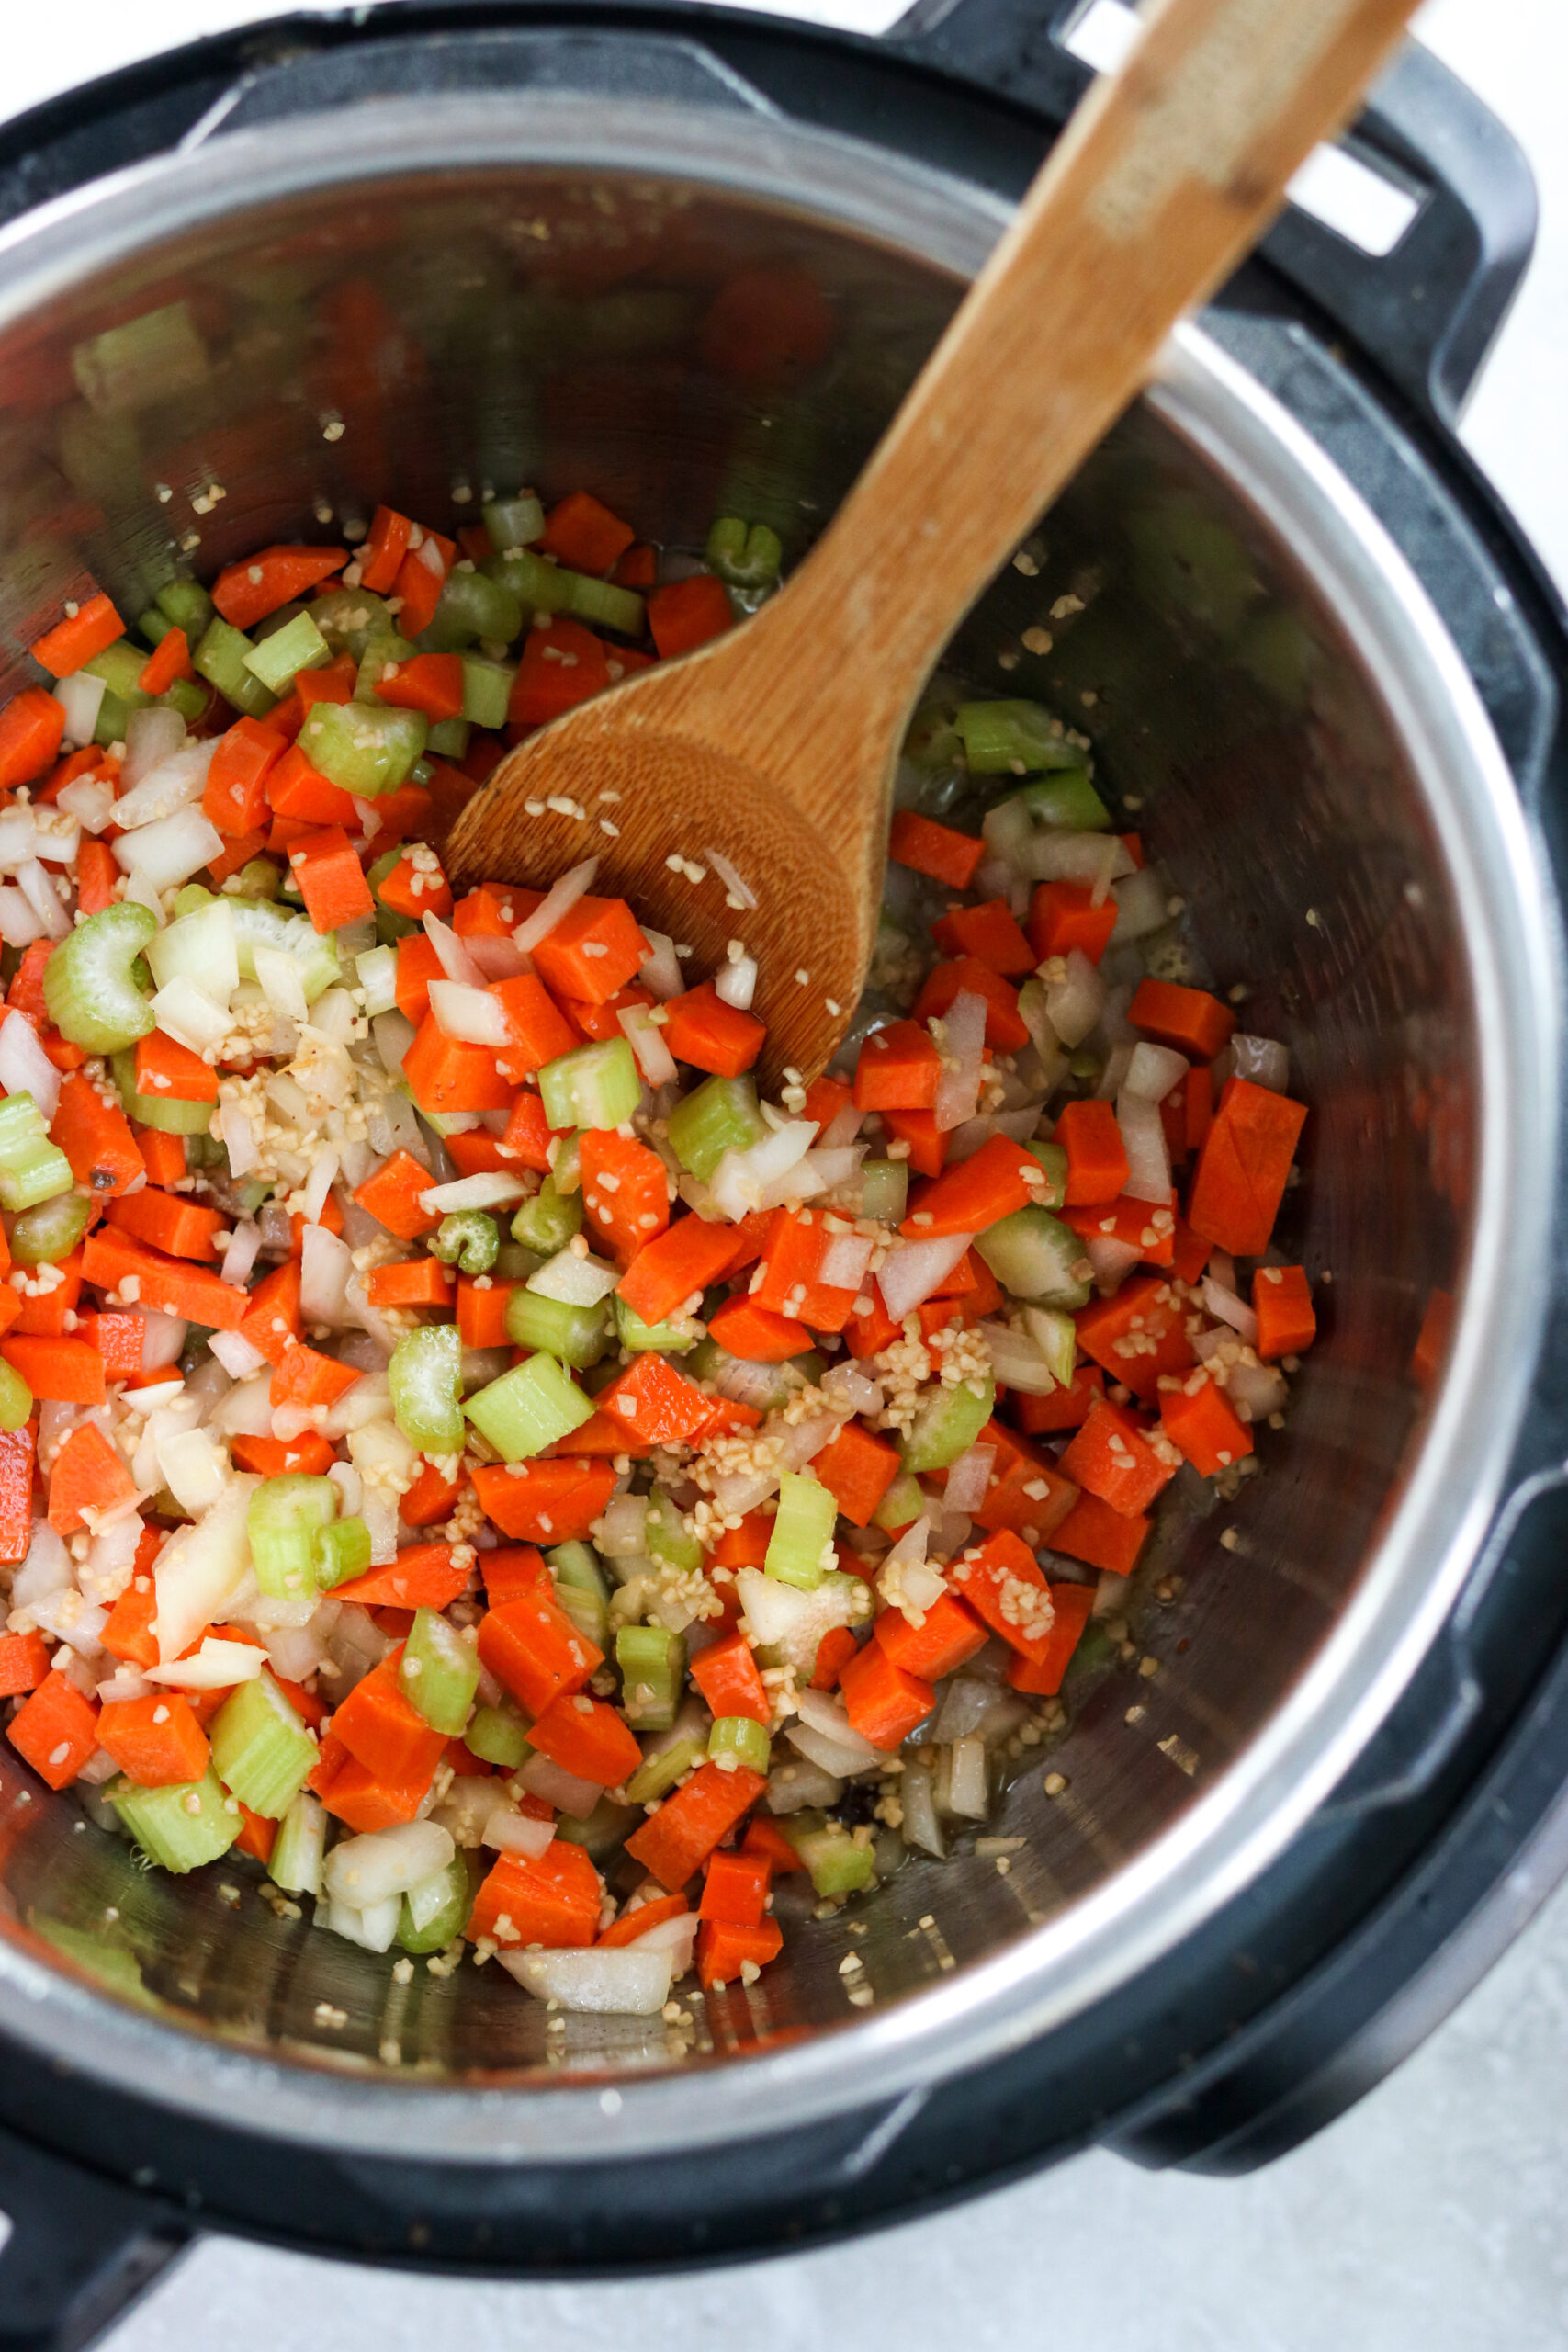 Onions, carrots, celery, and garlic sautéed in olive oil in the Instant Pot with a wooden spoon